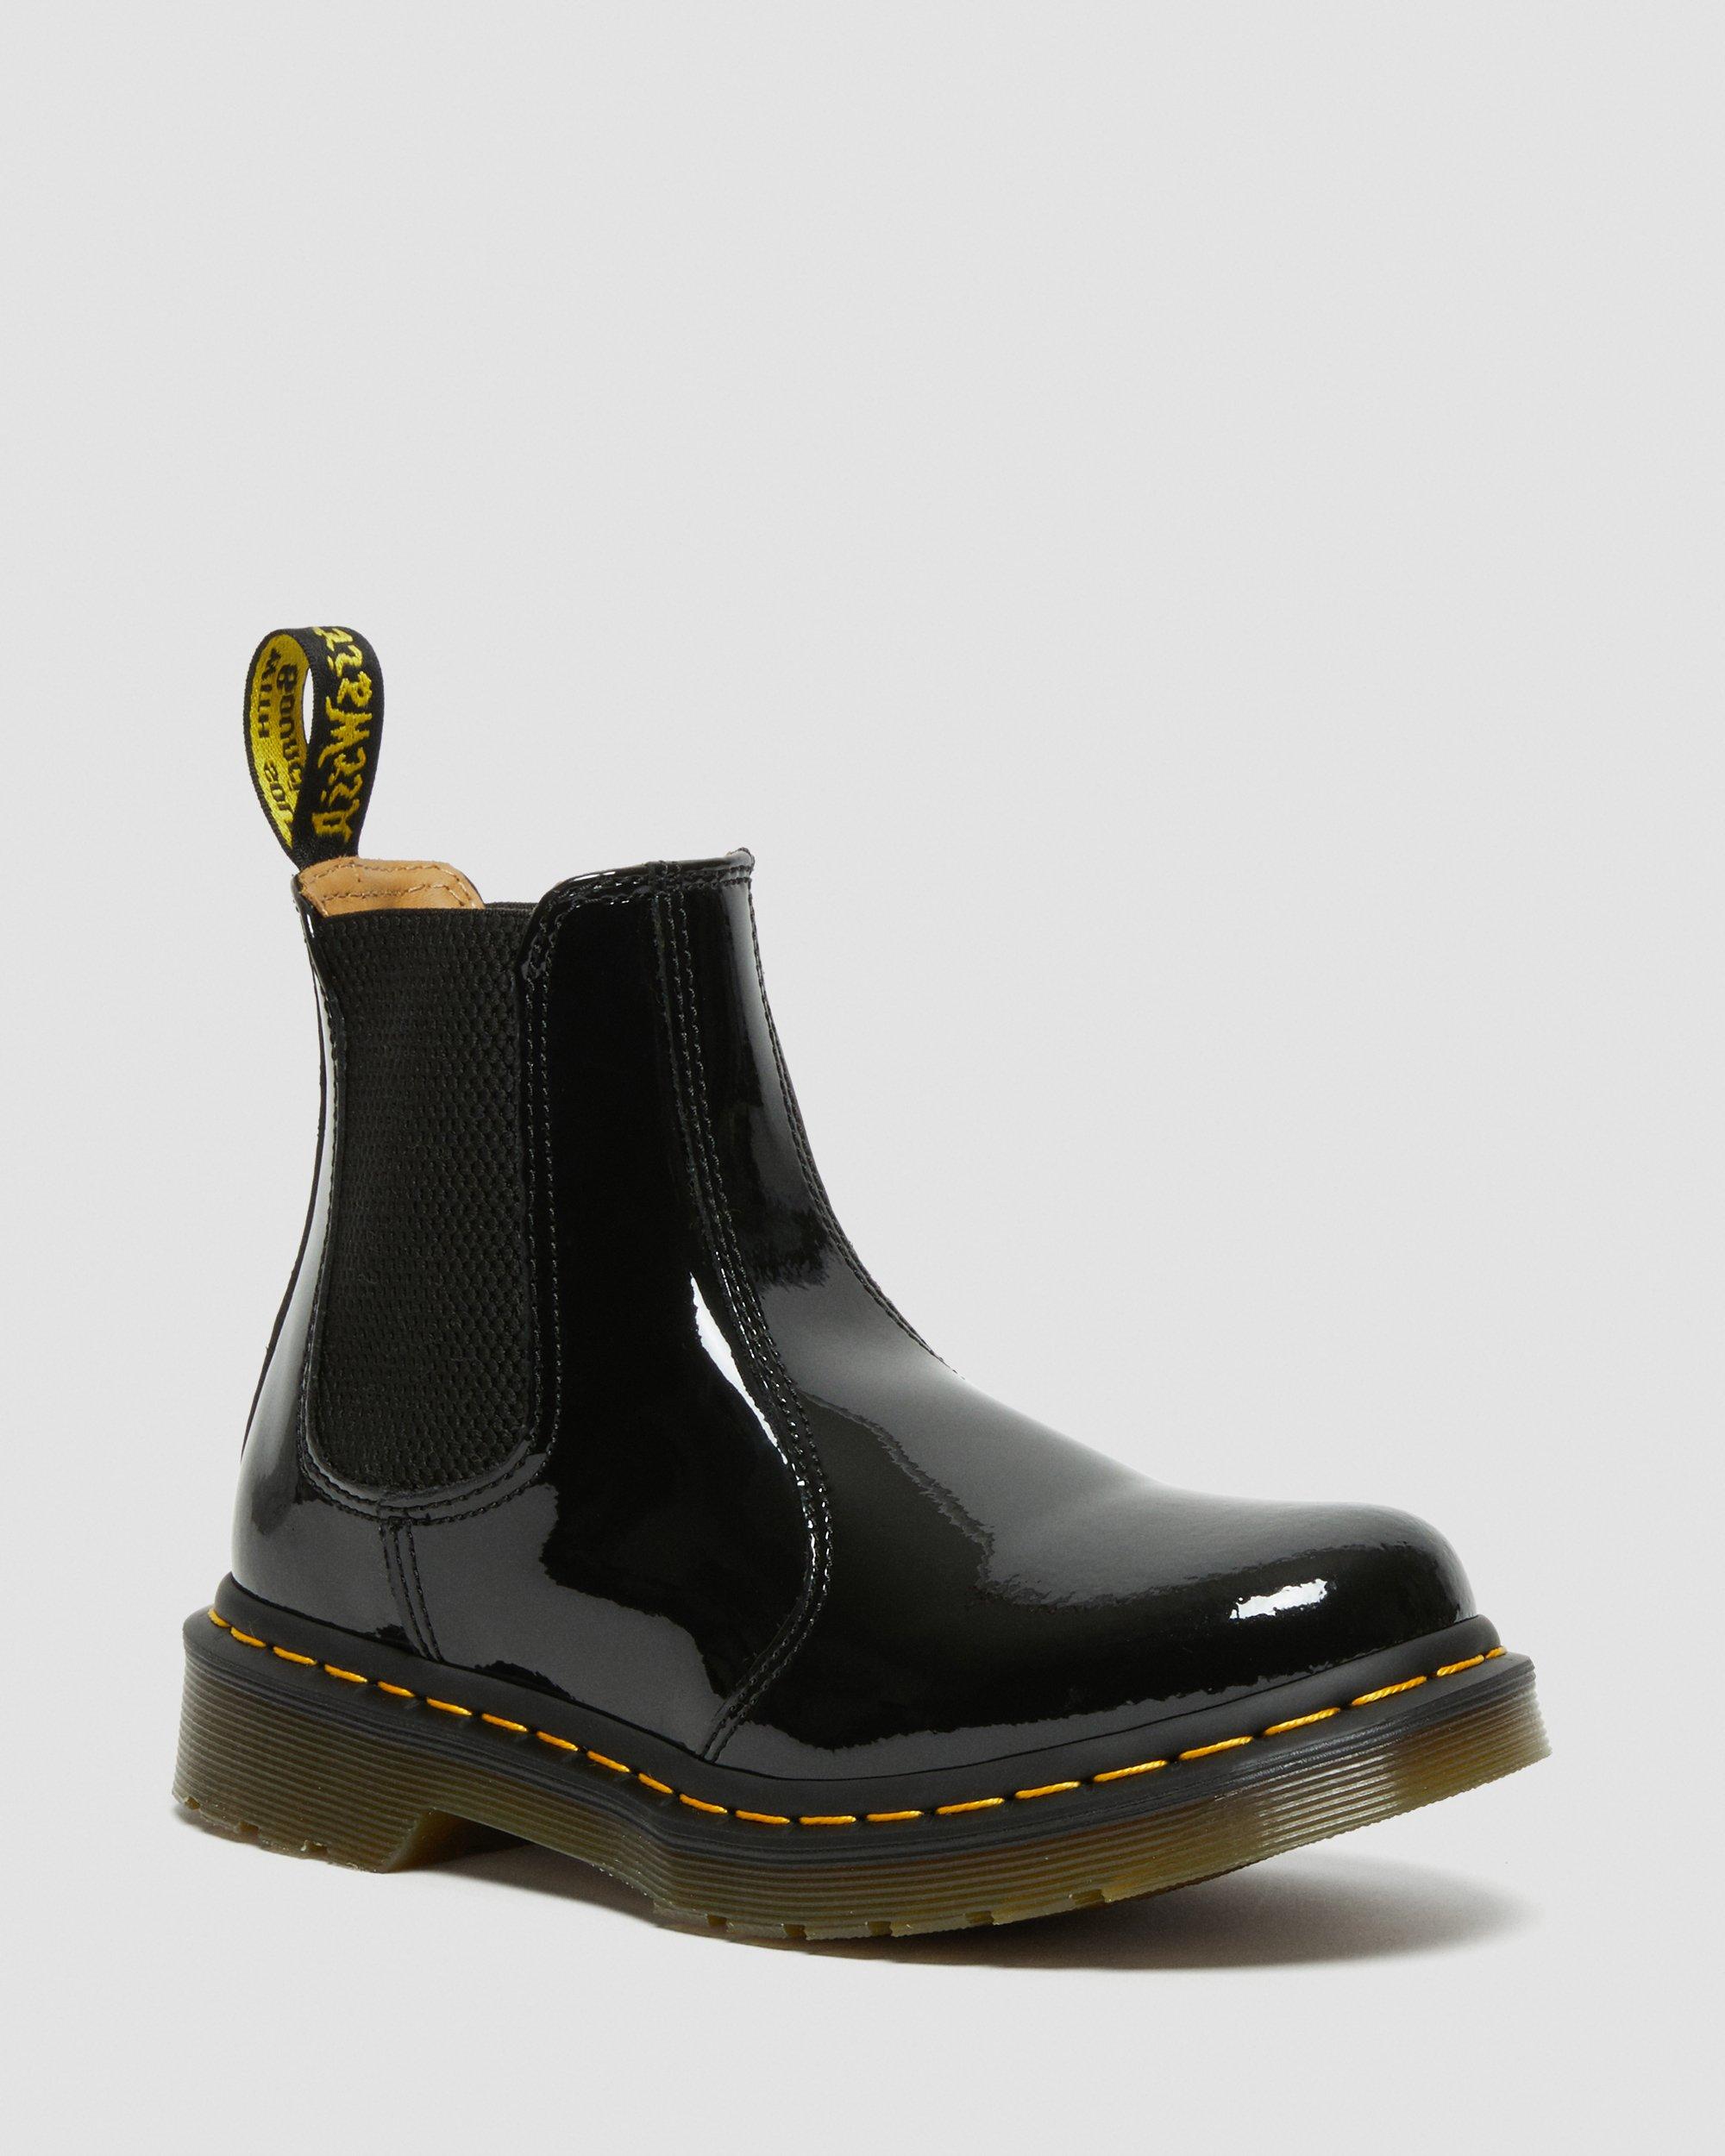 2976 Women's Patent Leather Chelsea Boots in Black Dr. Martens